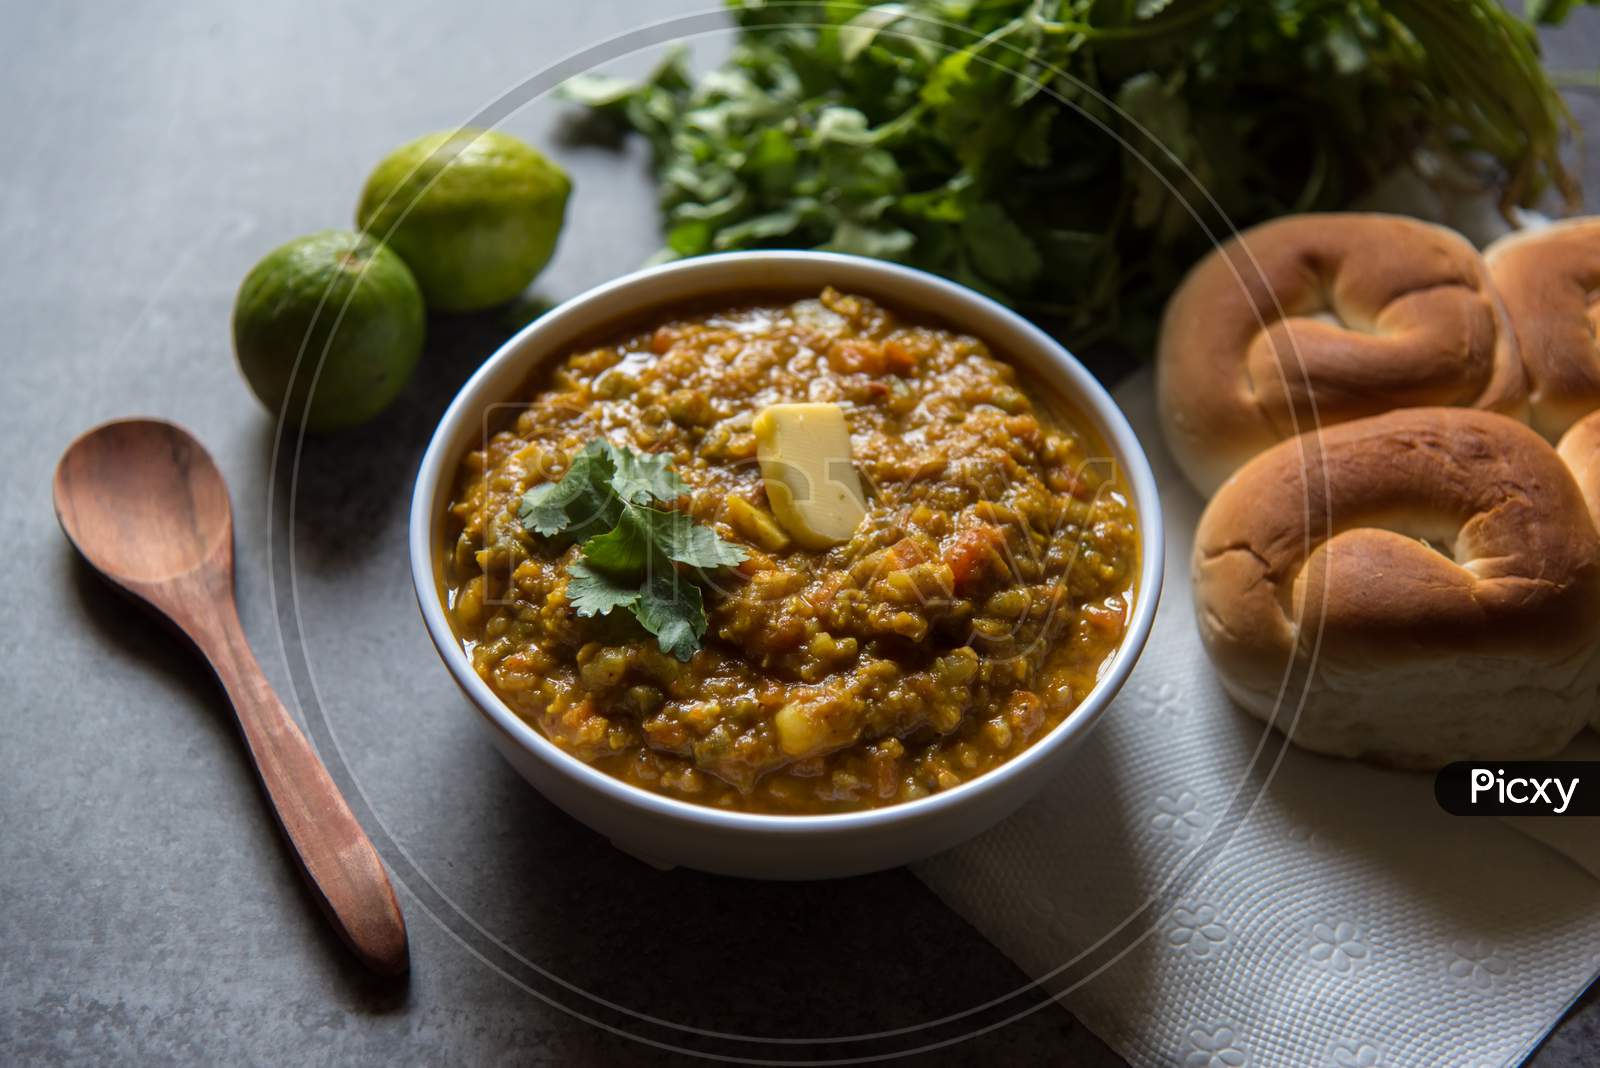 Close up of Spicy Indian dish pav bhaji or bread with masala curry along with food ingredients